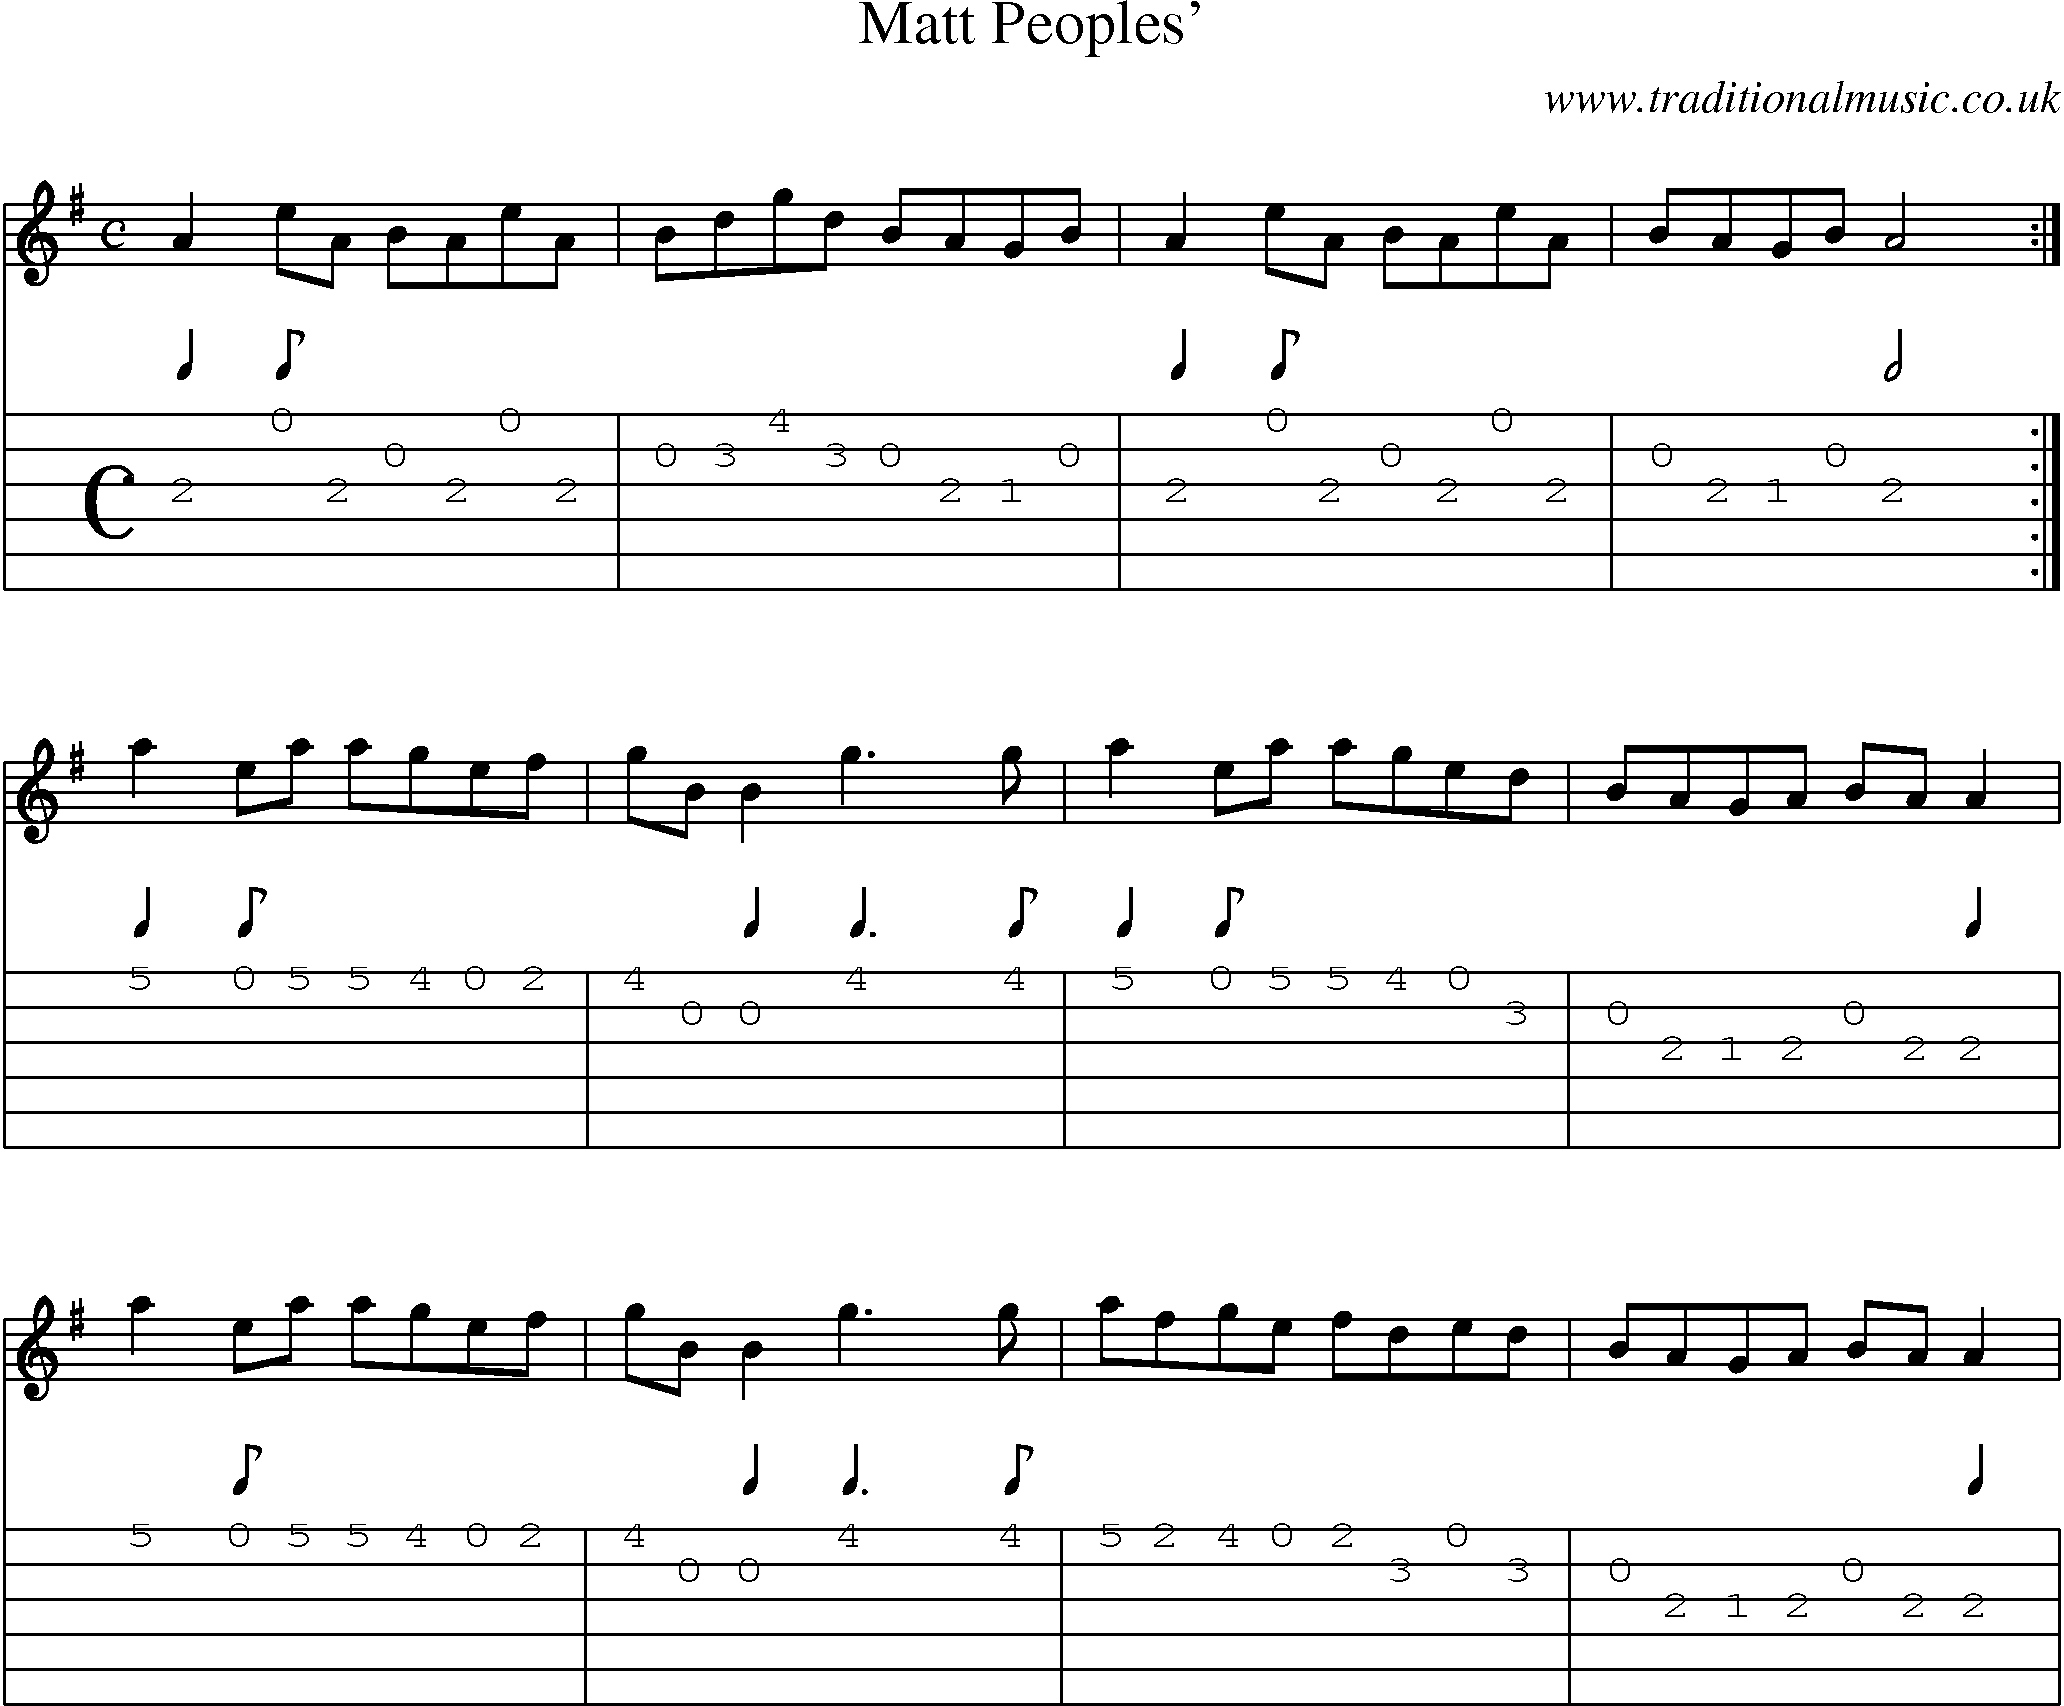 Music Score and Guitar Tabs for Matt Peoples